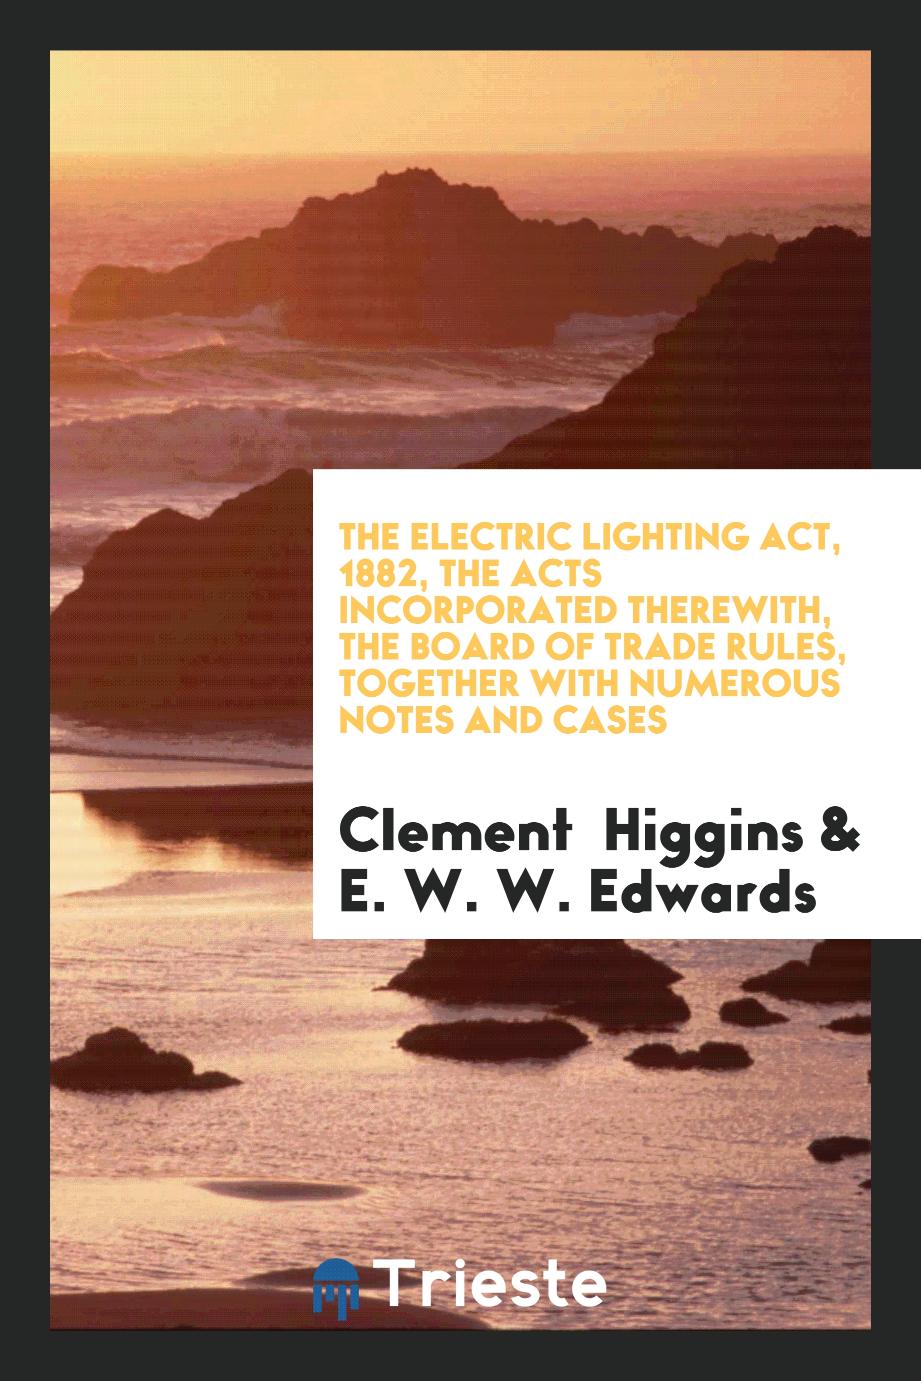 The Electric Lighting Act, 1882, the Acts Incorporated Therewith, the Board of Trade Rules, Together with Numerous Notes and Cases